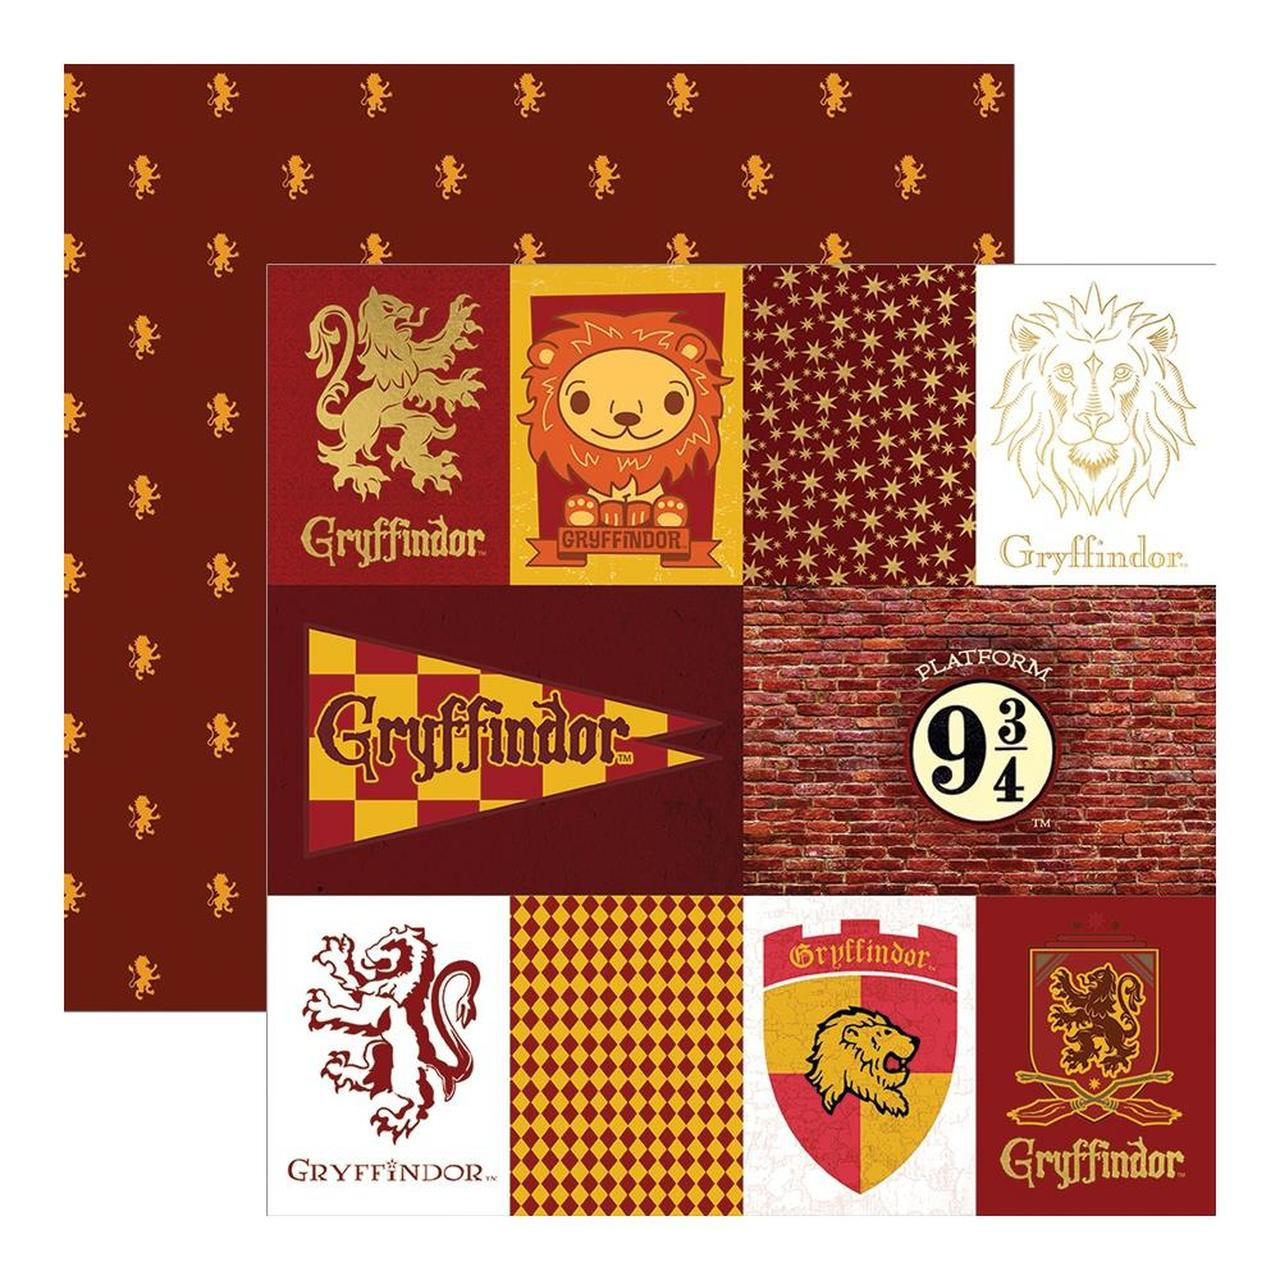 Harry Potter Collection, Hufflepuffs House, double-sided scrapbook